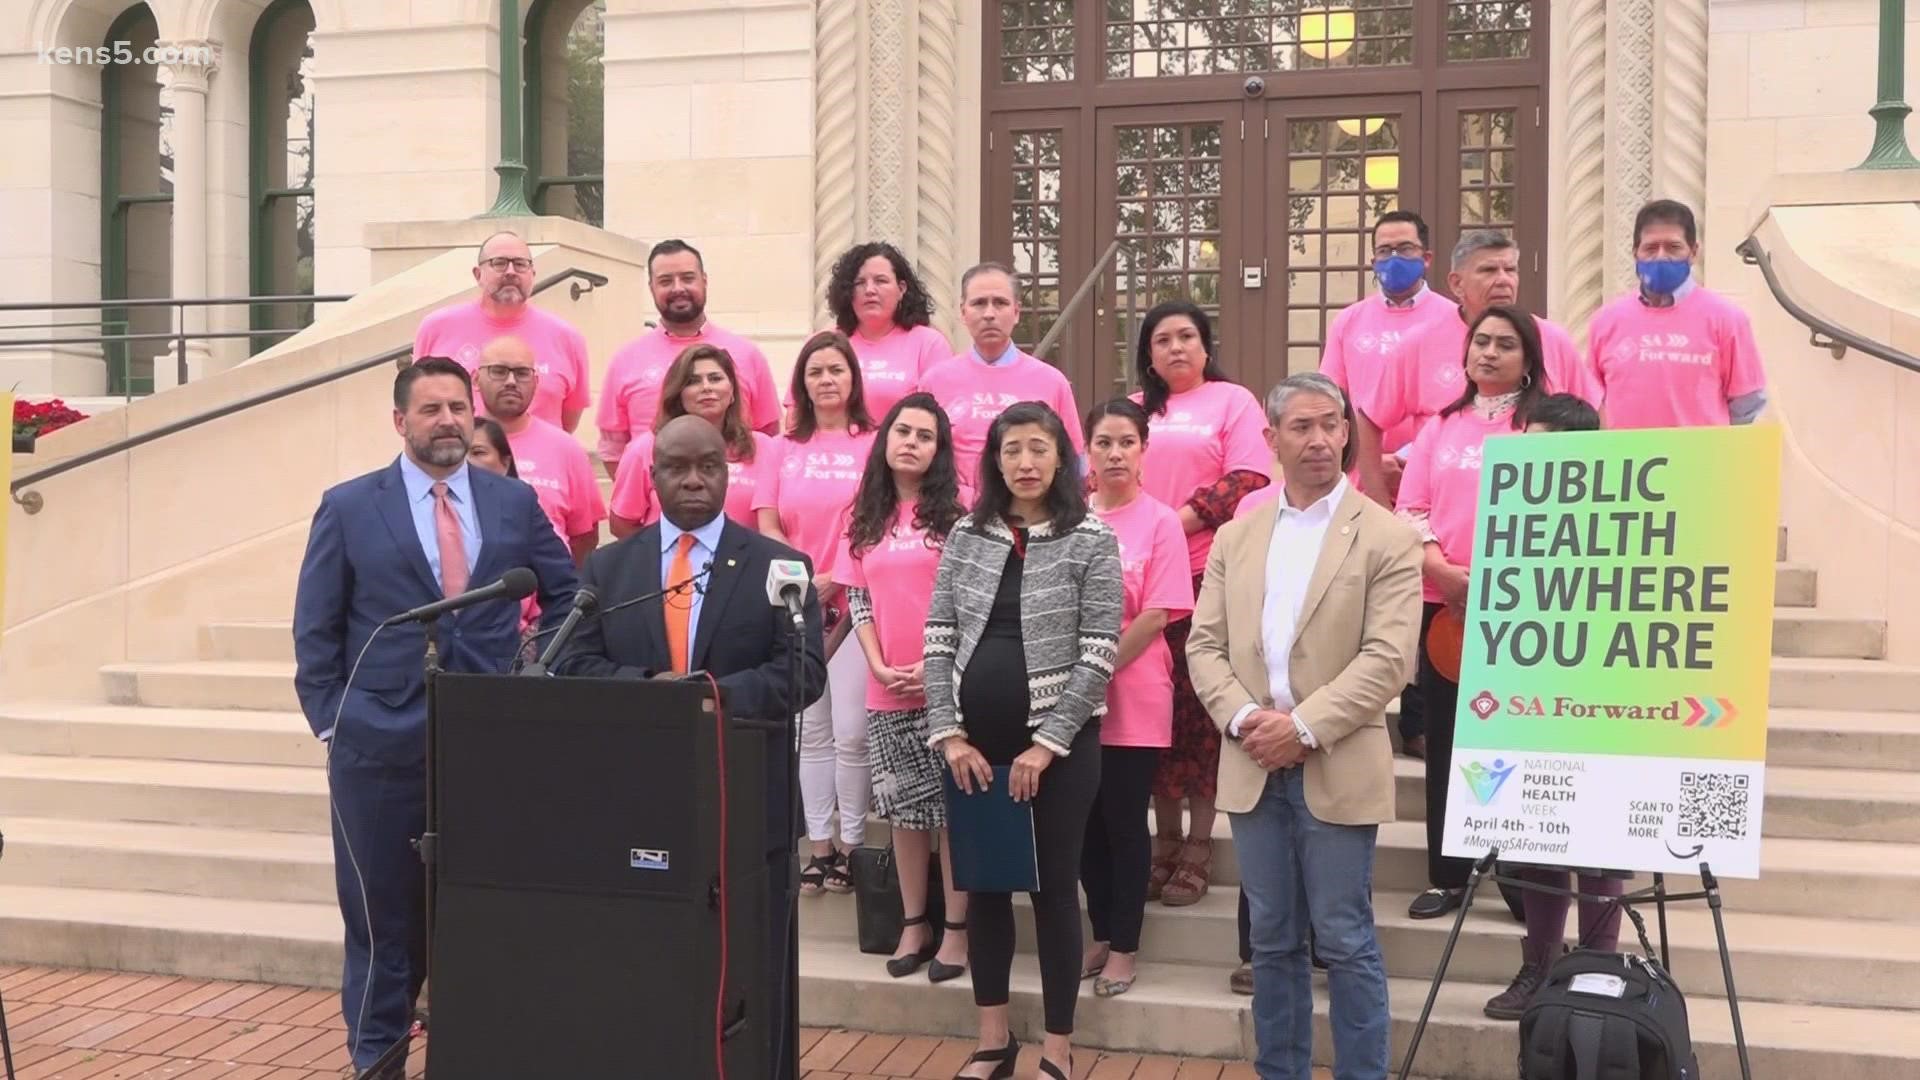 Metro Health and city leaders launched "SA Forward" to address health disparities across San Antonio in several different areas.